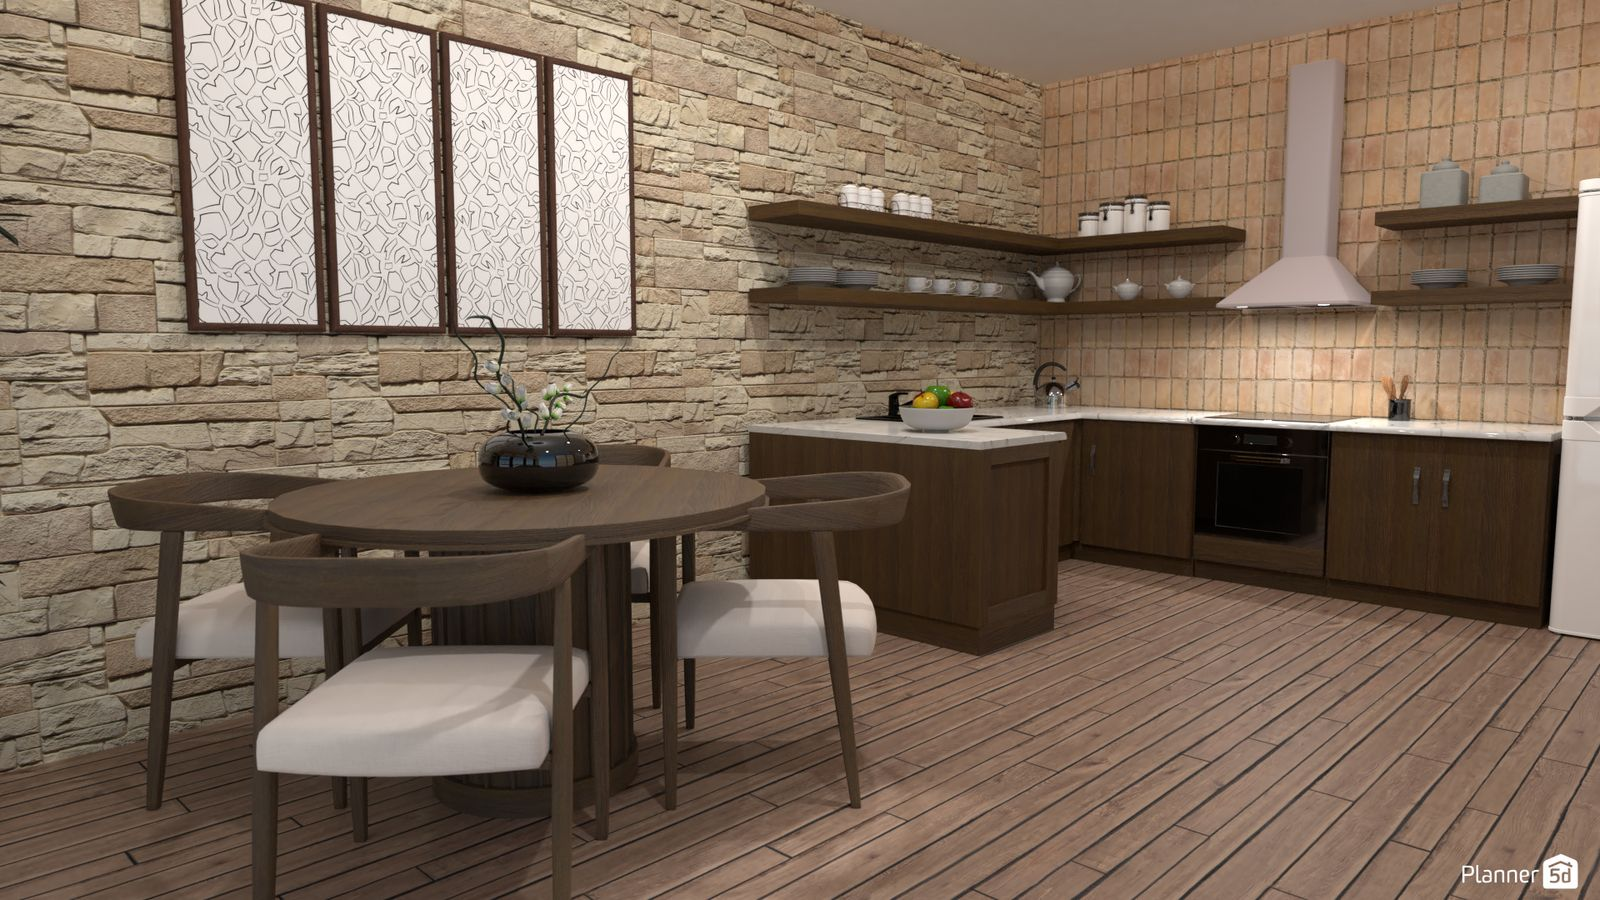 differnt kitchen layouts and styles